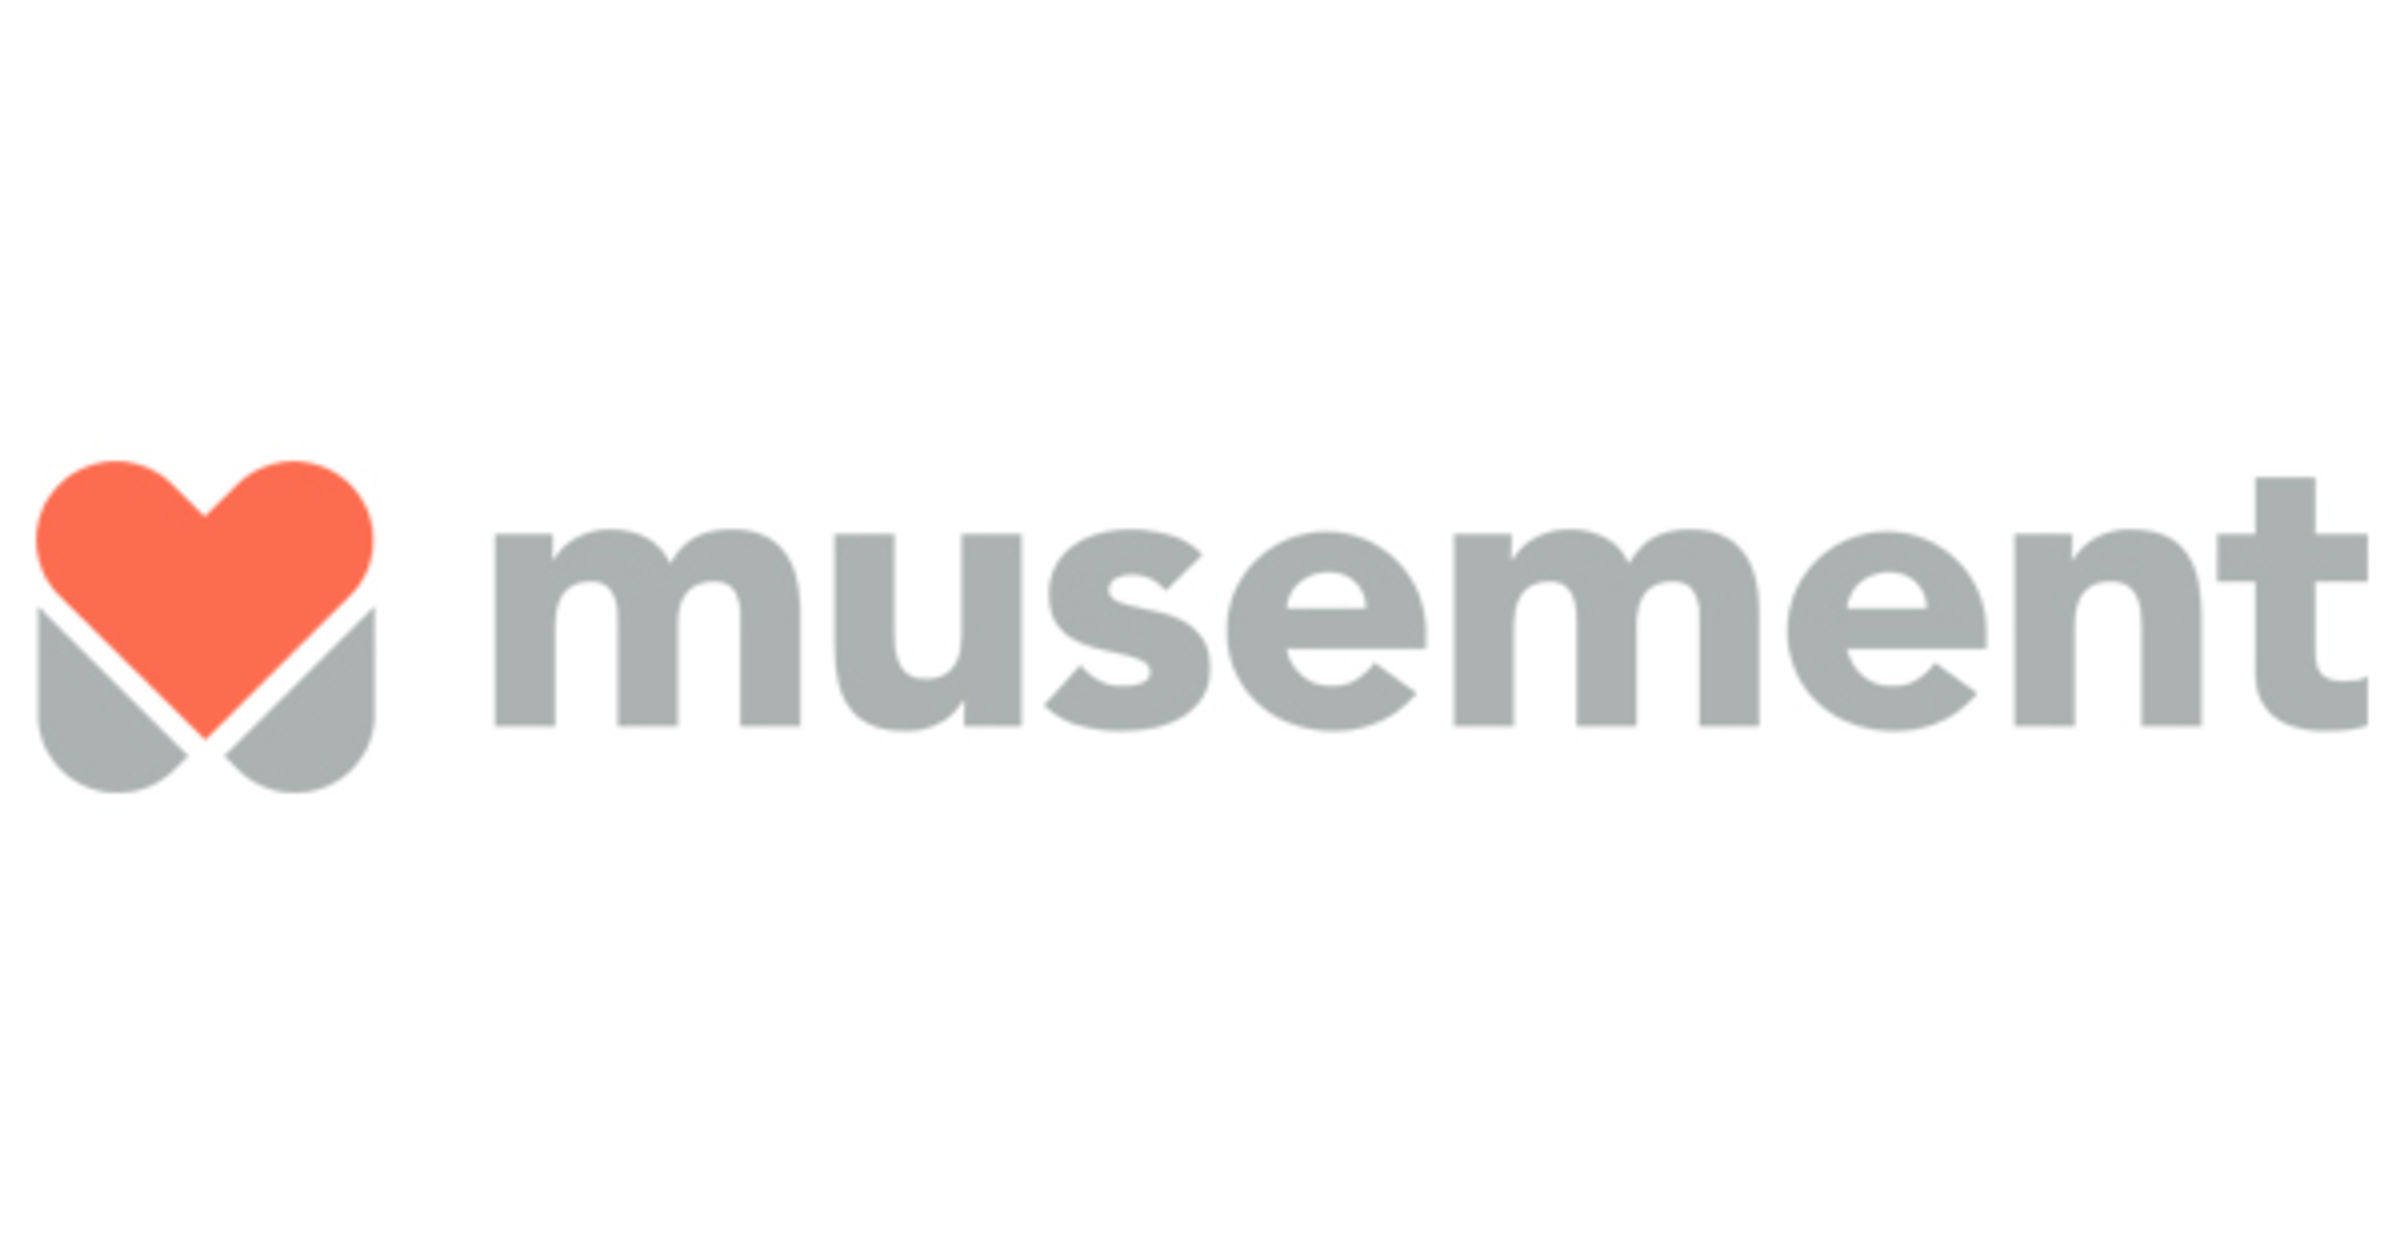 Musement Coupons & Promo Codes